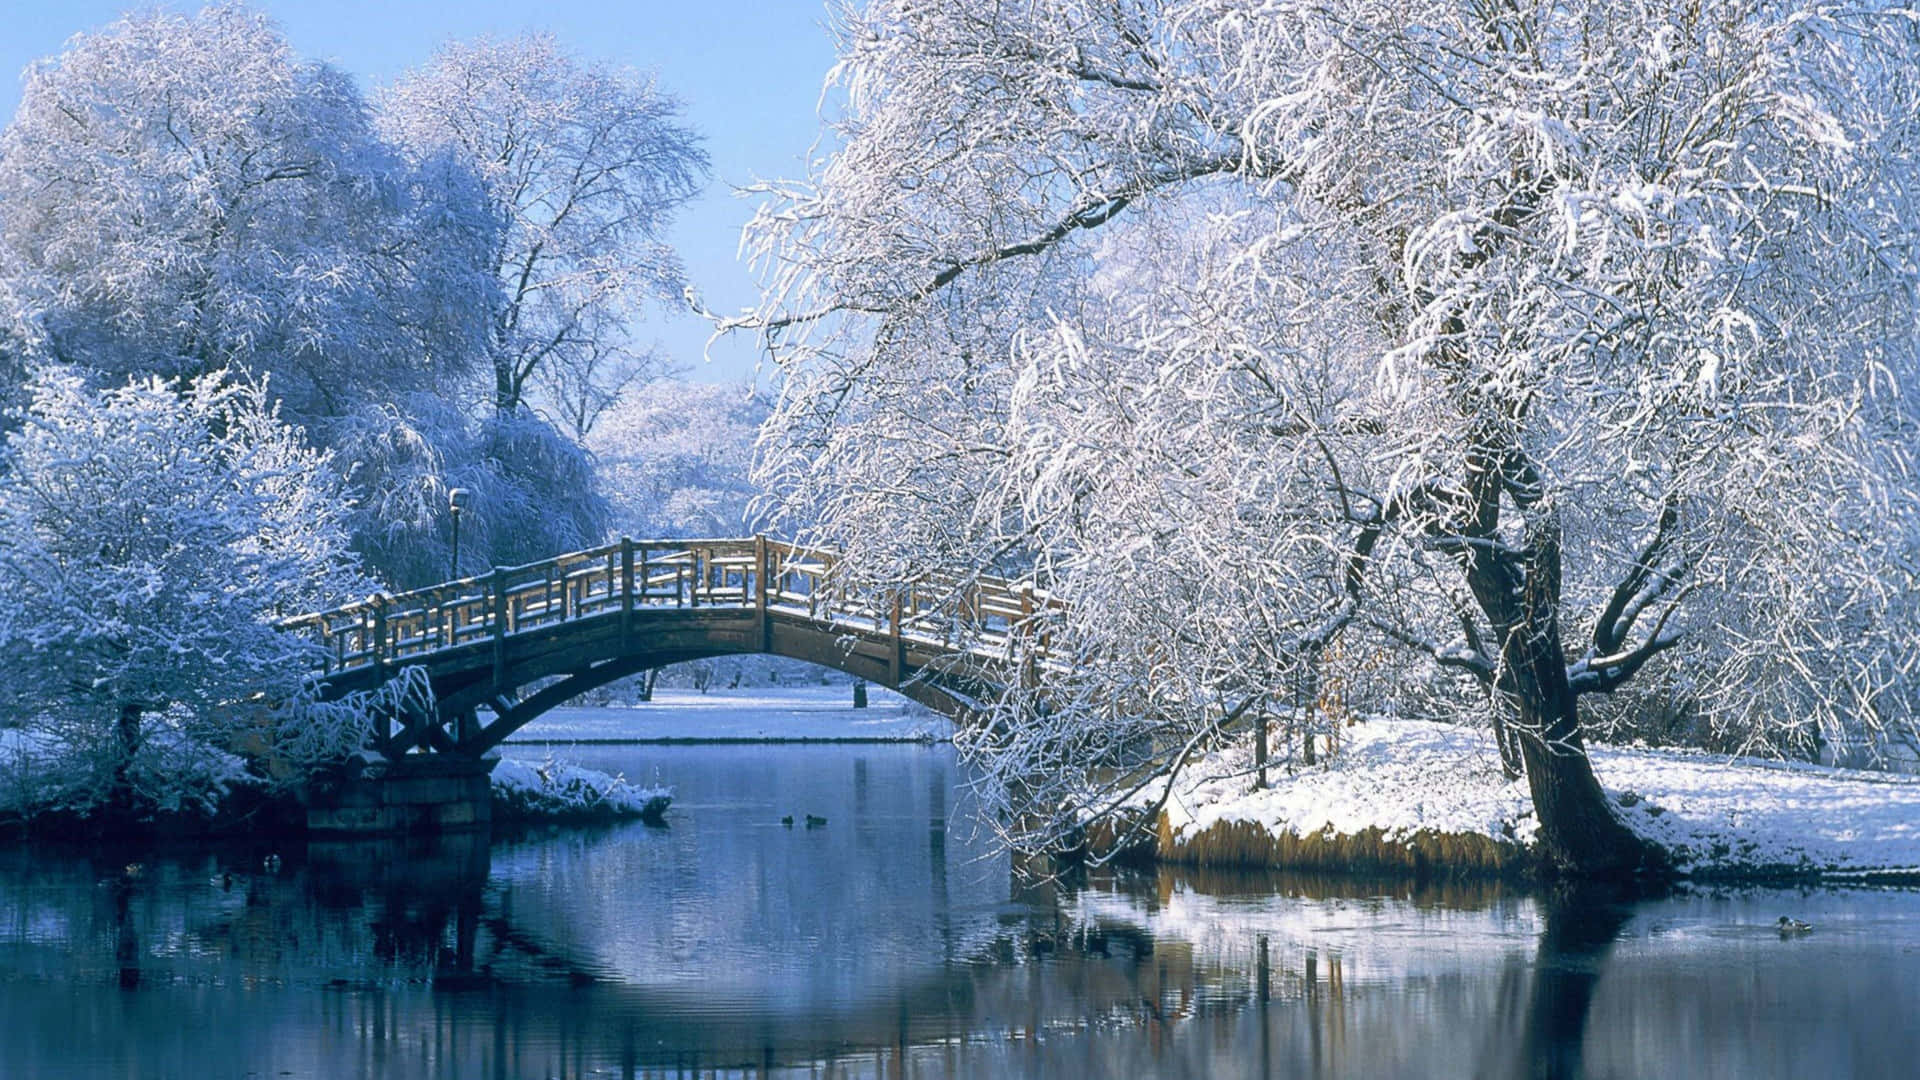 A Bridge Over A Frozen River With Snow Covered Trees